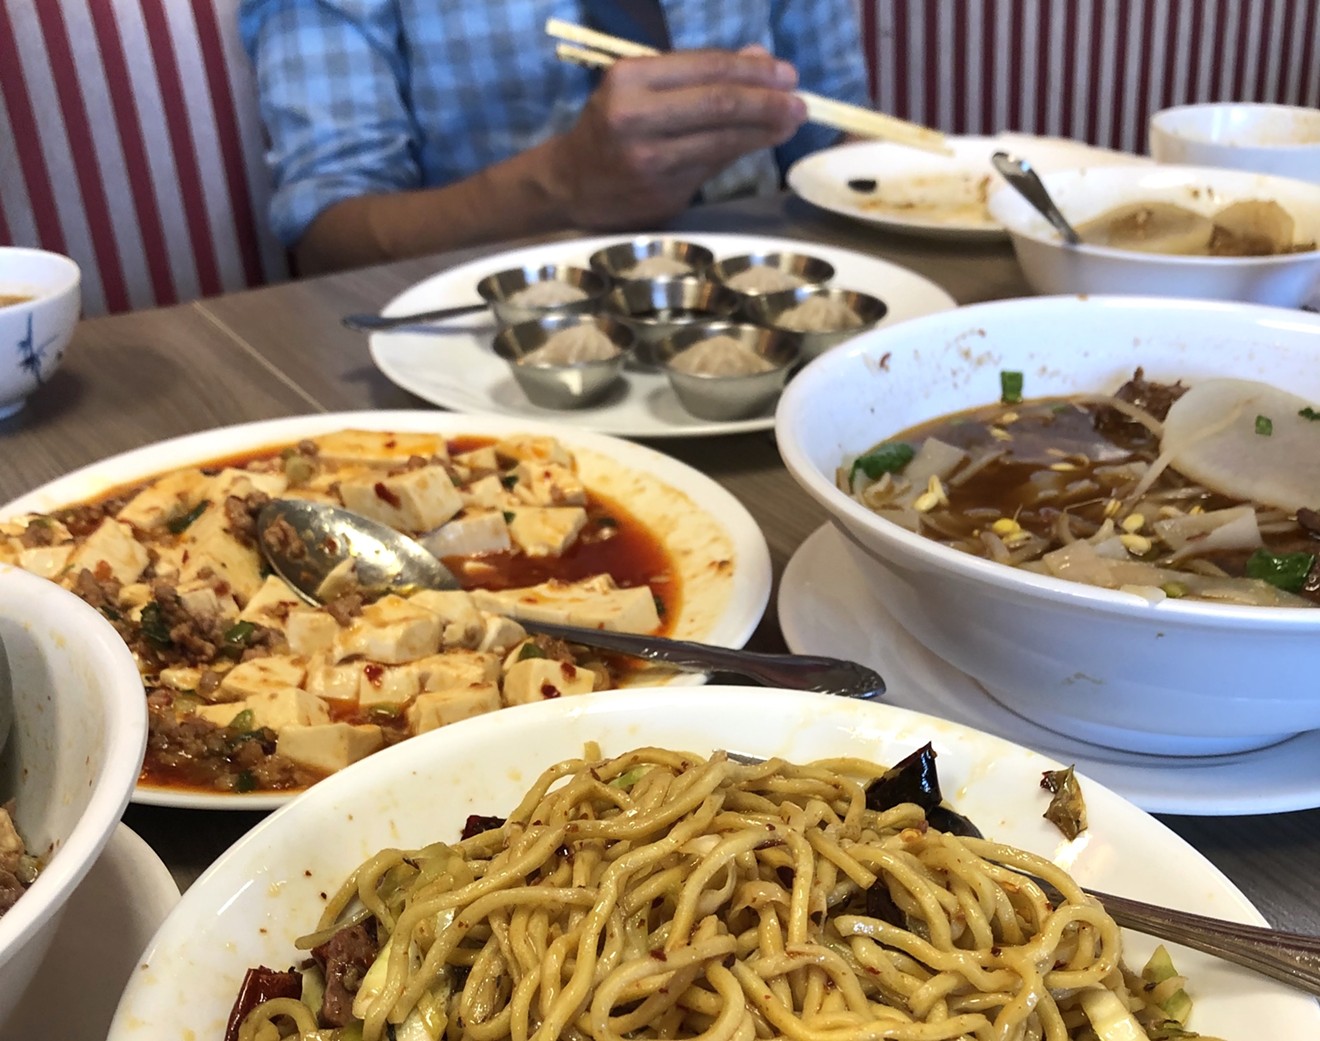 A fleet of dishes from Xi'an Fusin Cafe in Mesa.